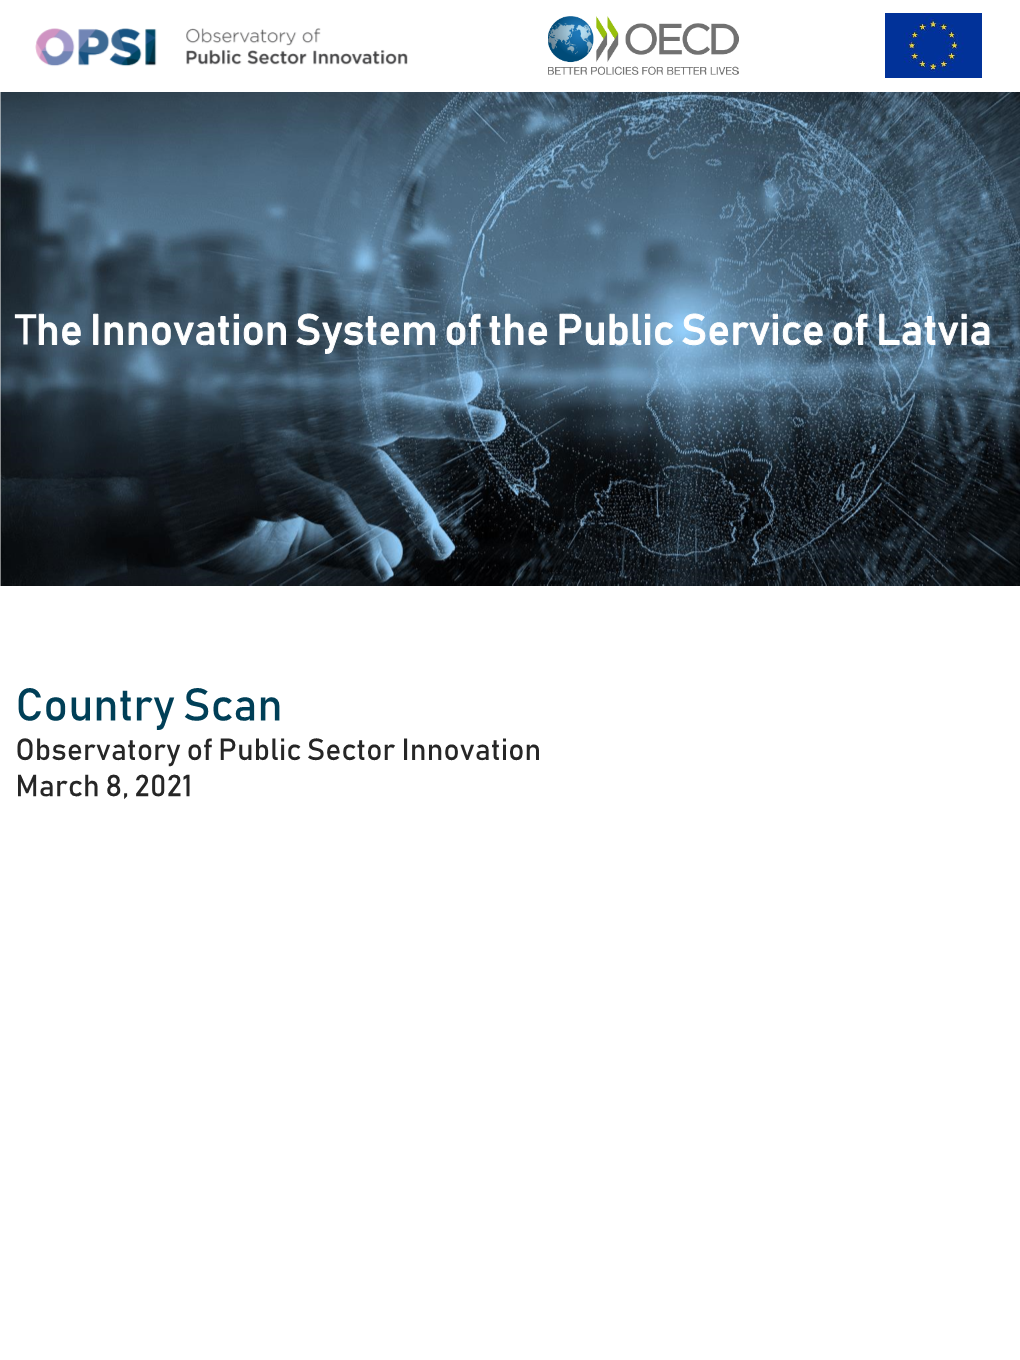 Country Scan Observatory of Public Sector Innovation March 8, 2021